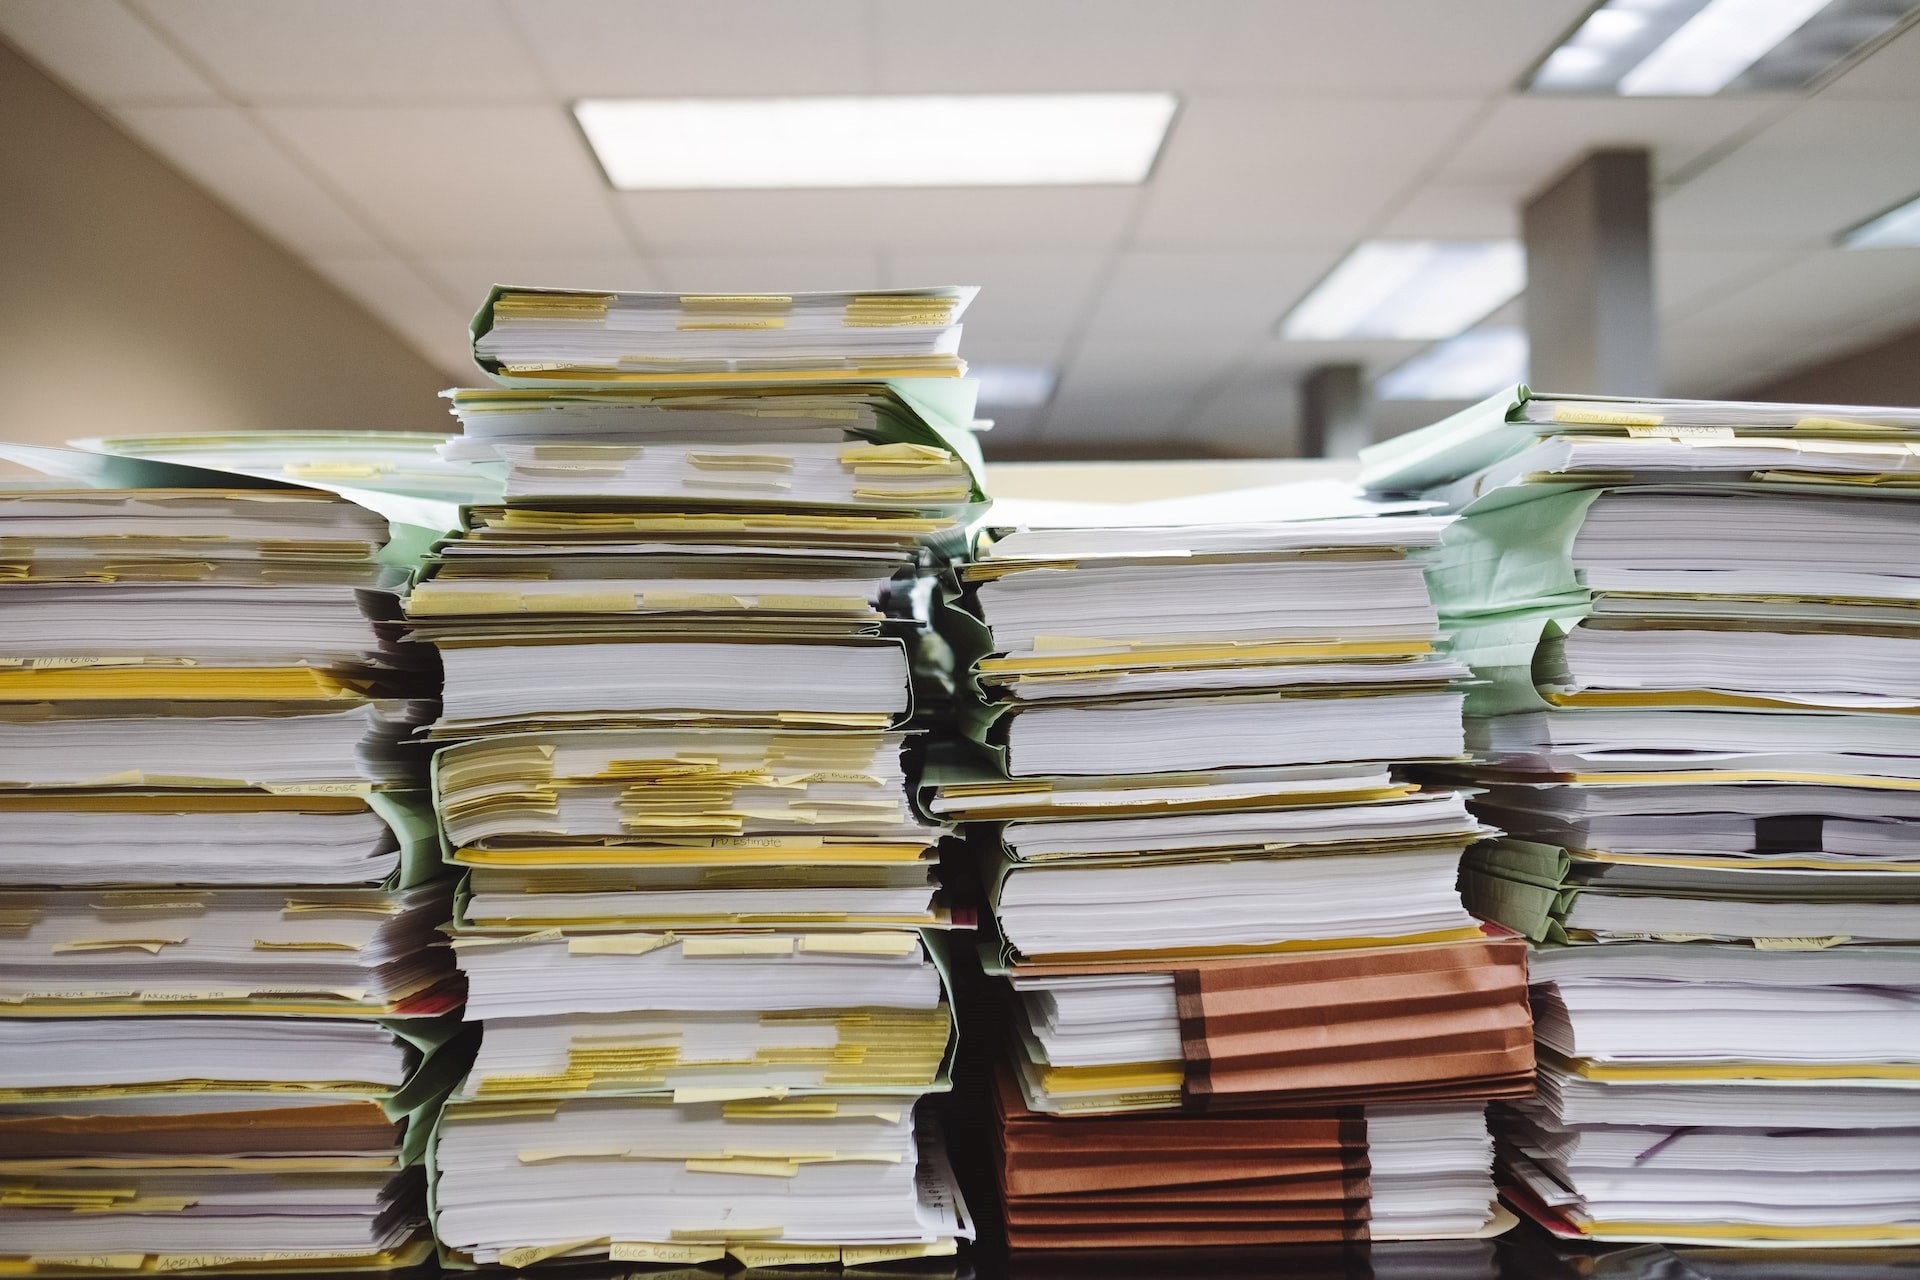 Stacks of paper documents piled up in an office